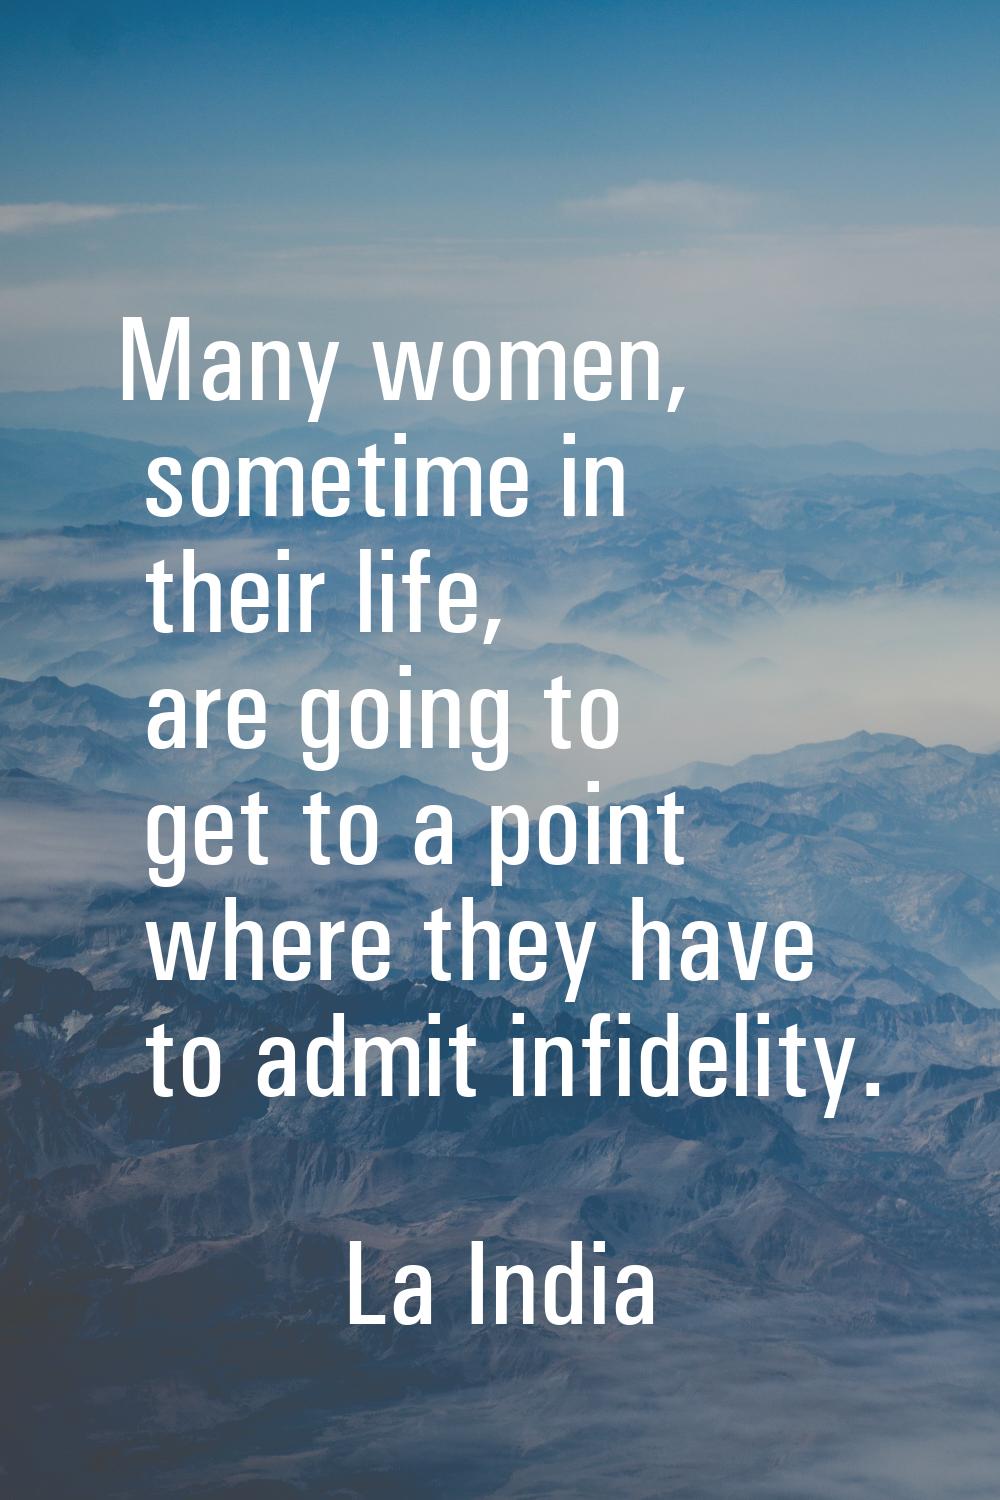 Many women, sometime in their life, are going to get to a point where they have to admit infidelity